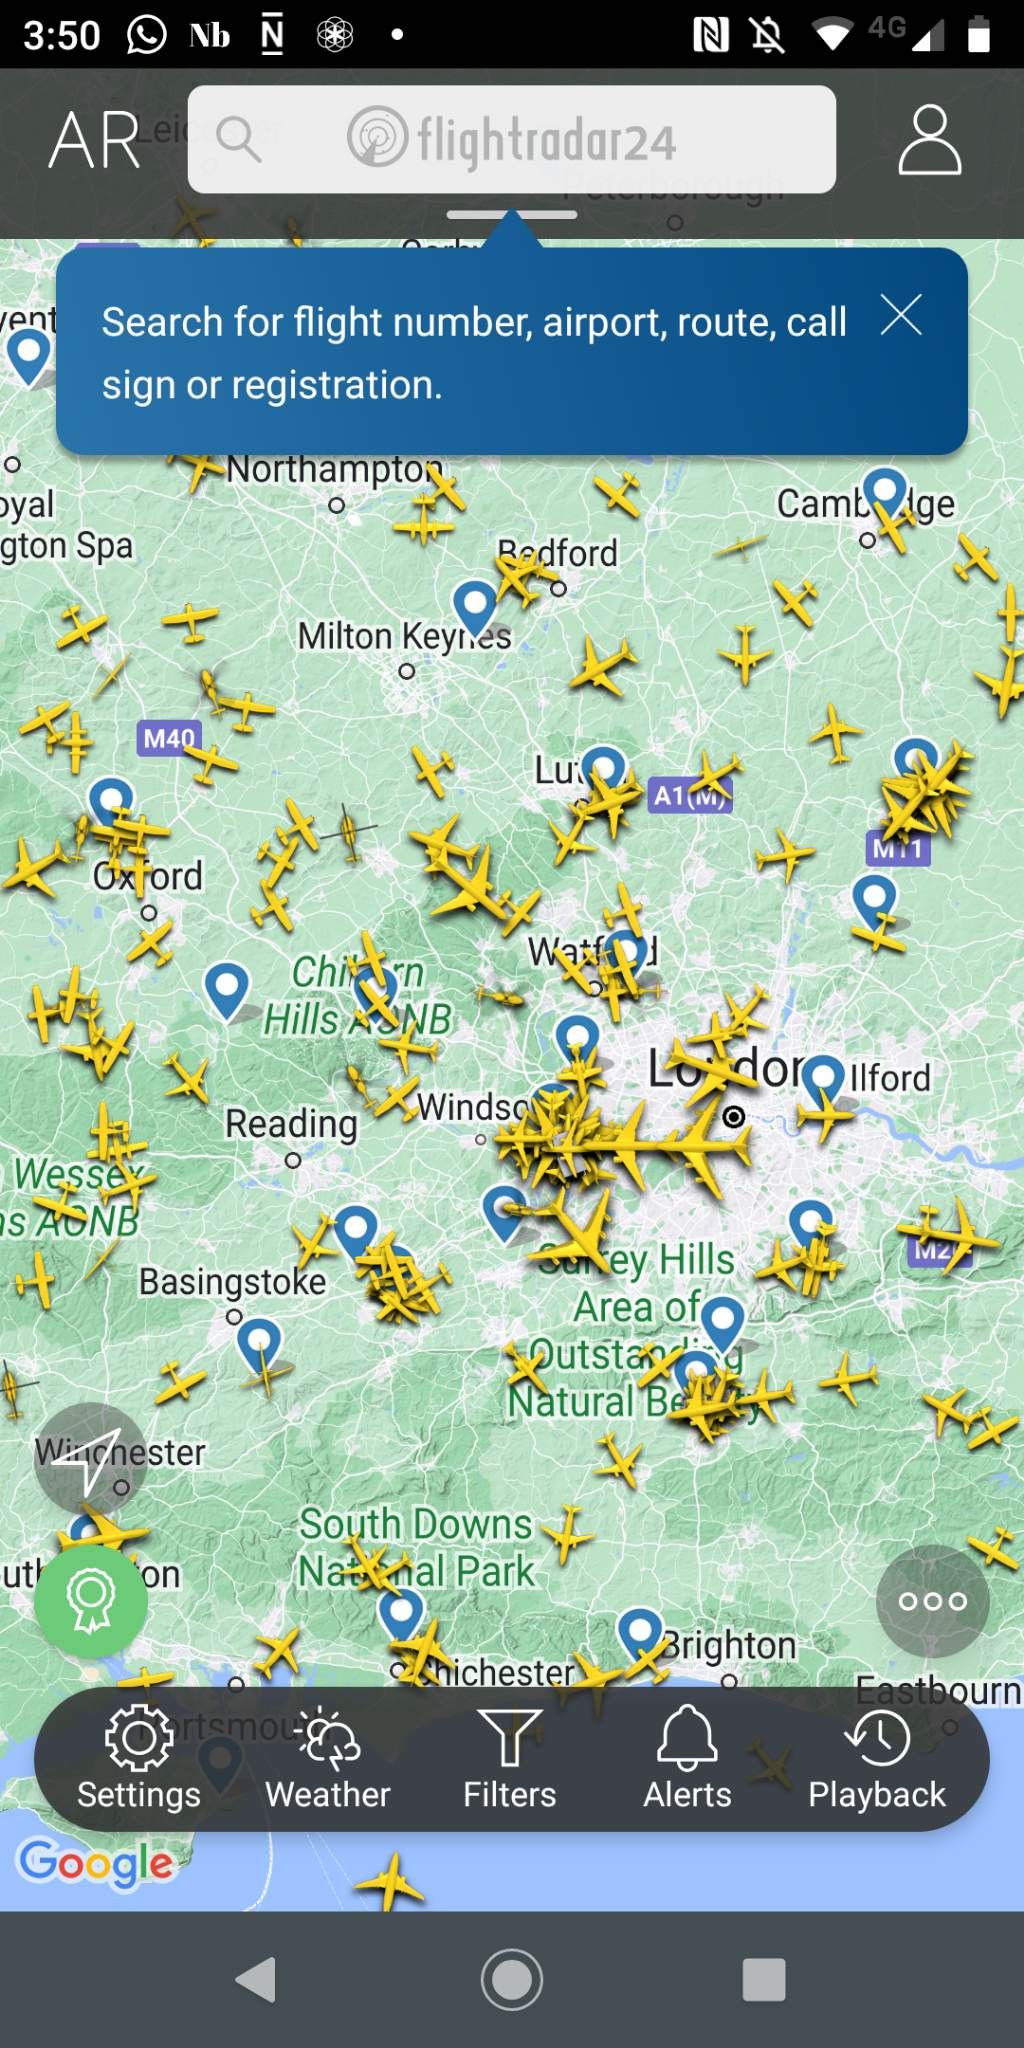 Flightrader24 app showing maps and planes 